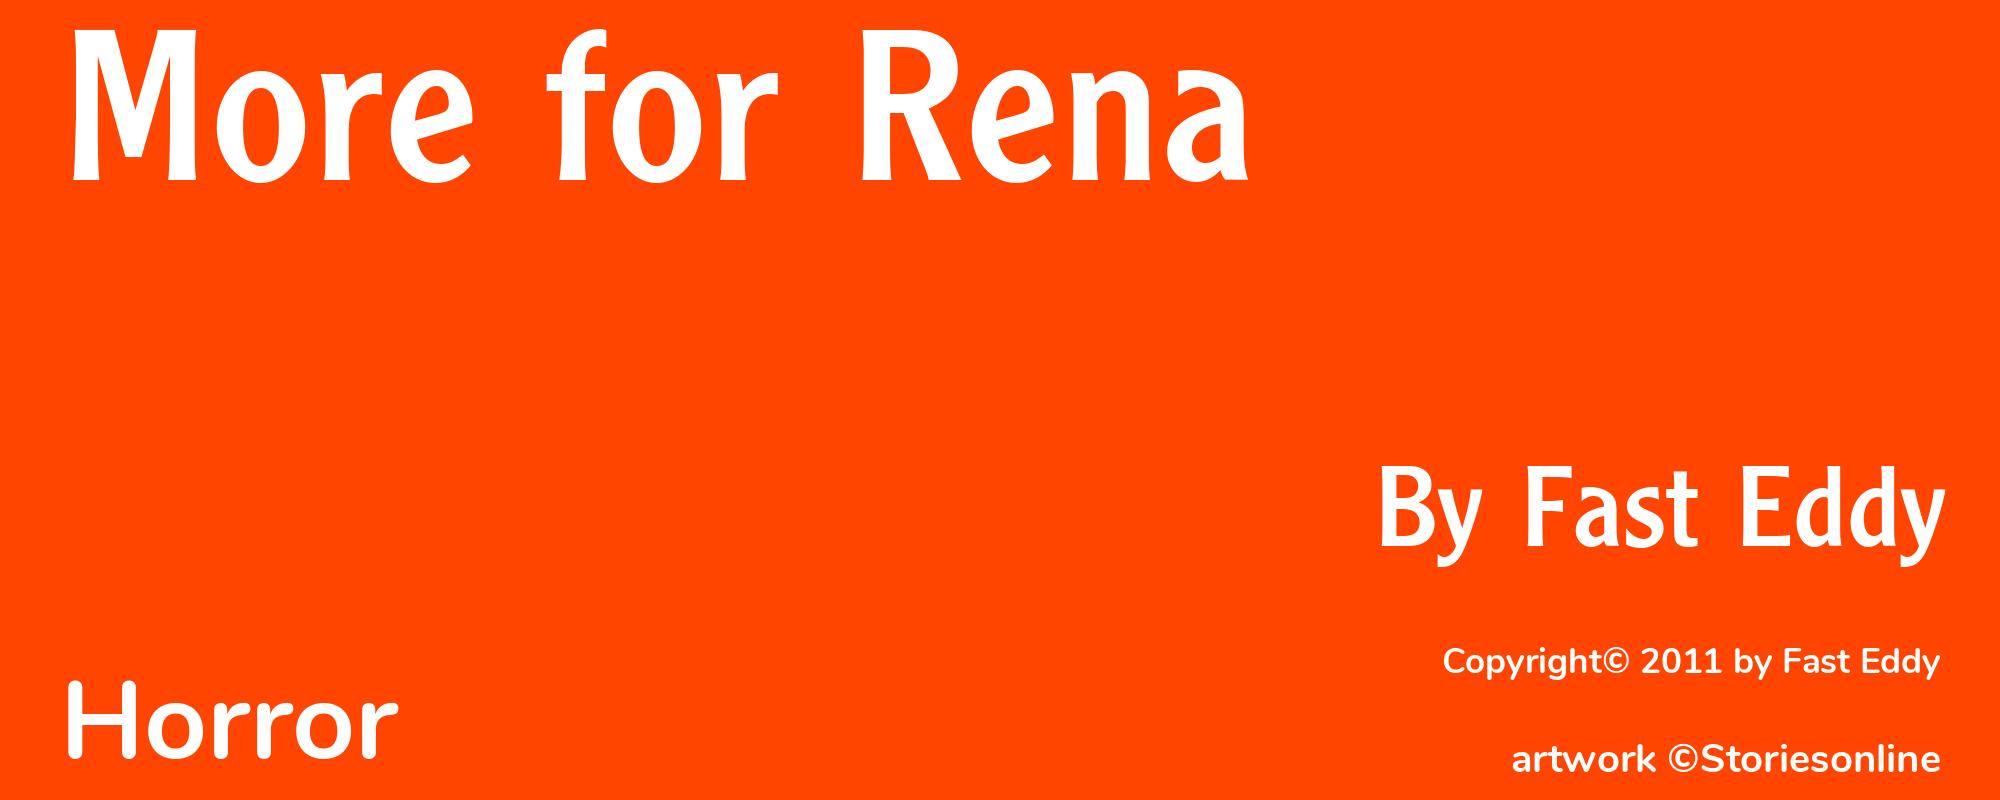 More for Rena - Cover